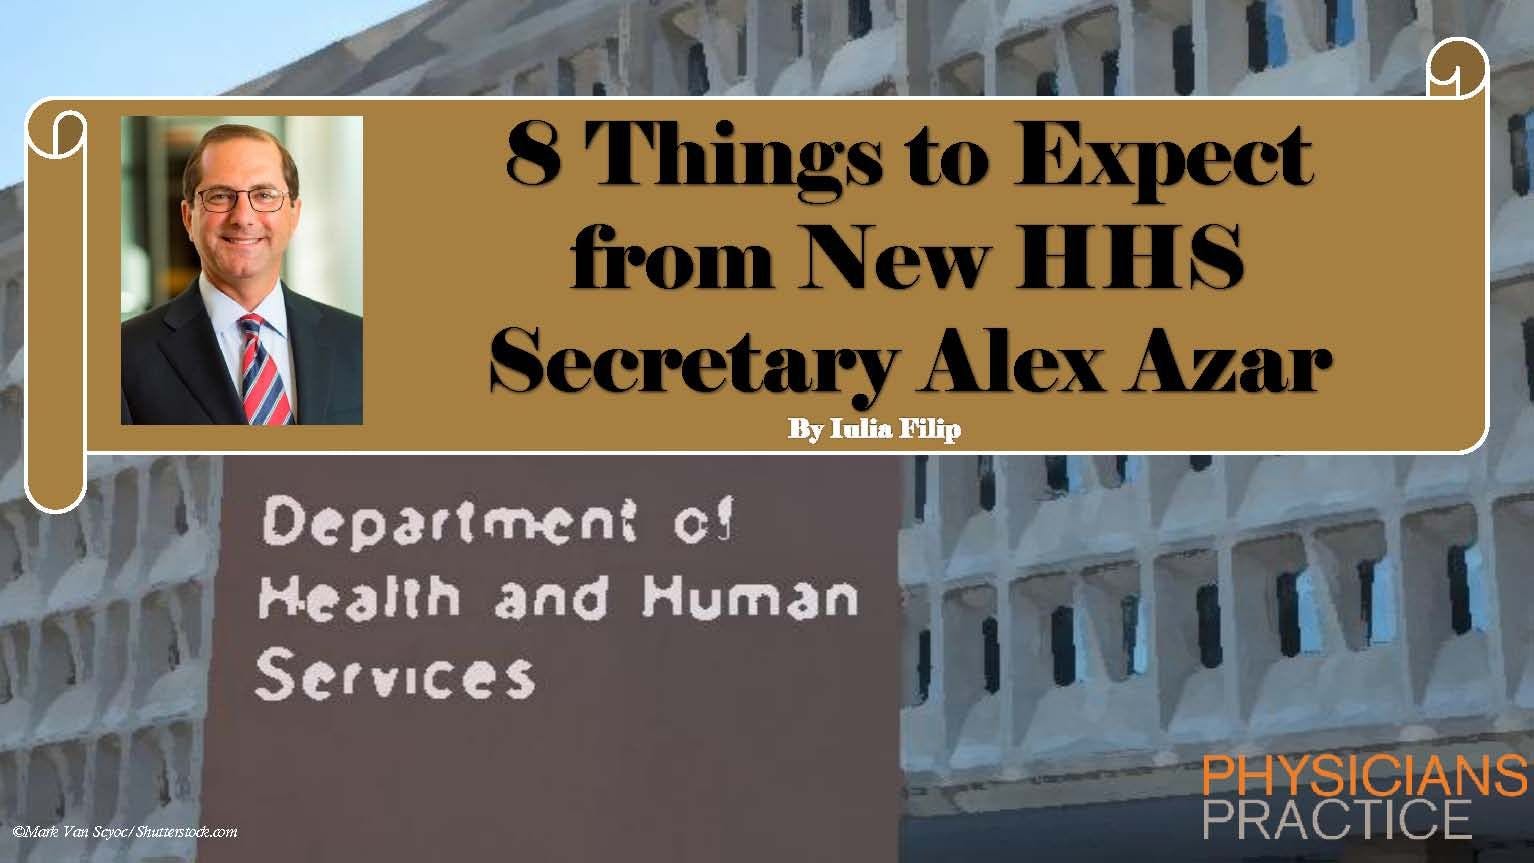 8 Things to Expect from New HHS Secretary Alex Azar